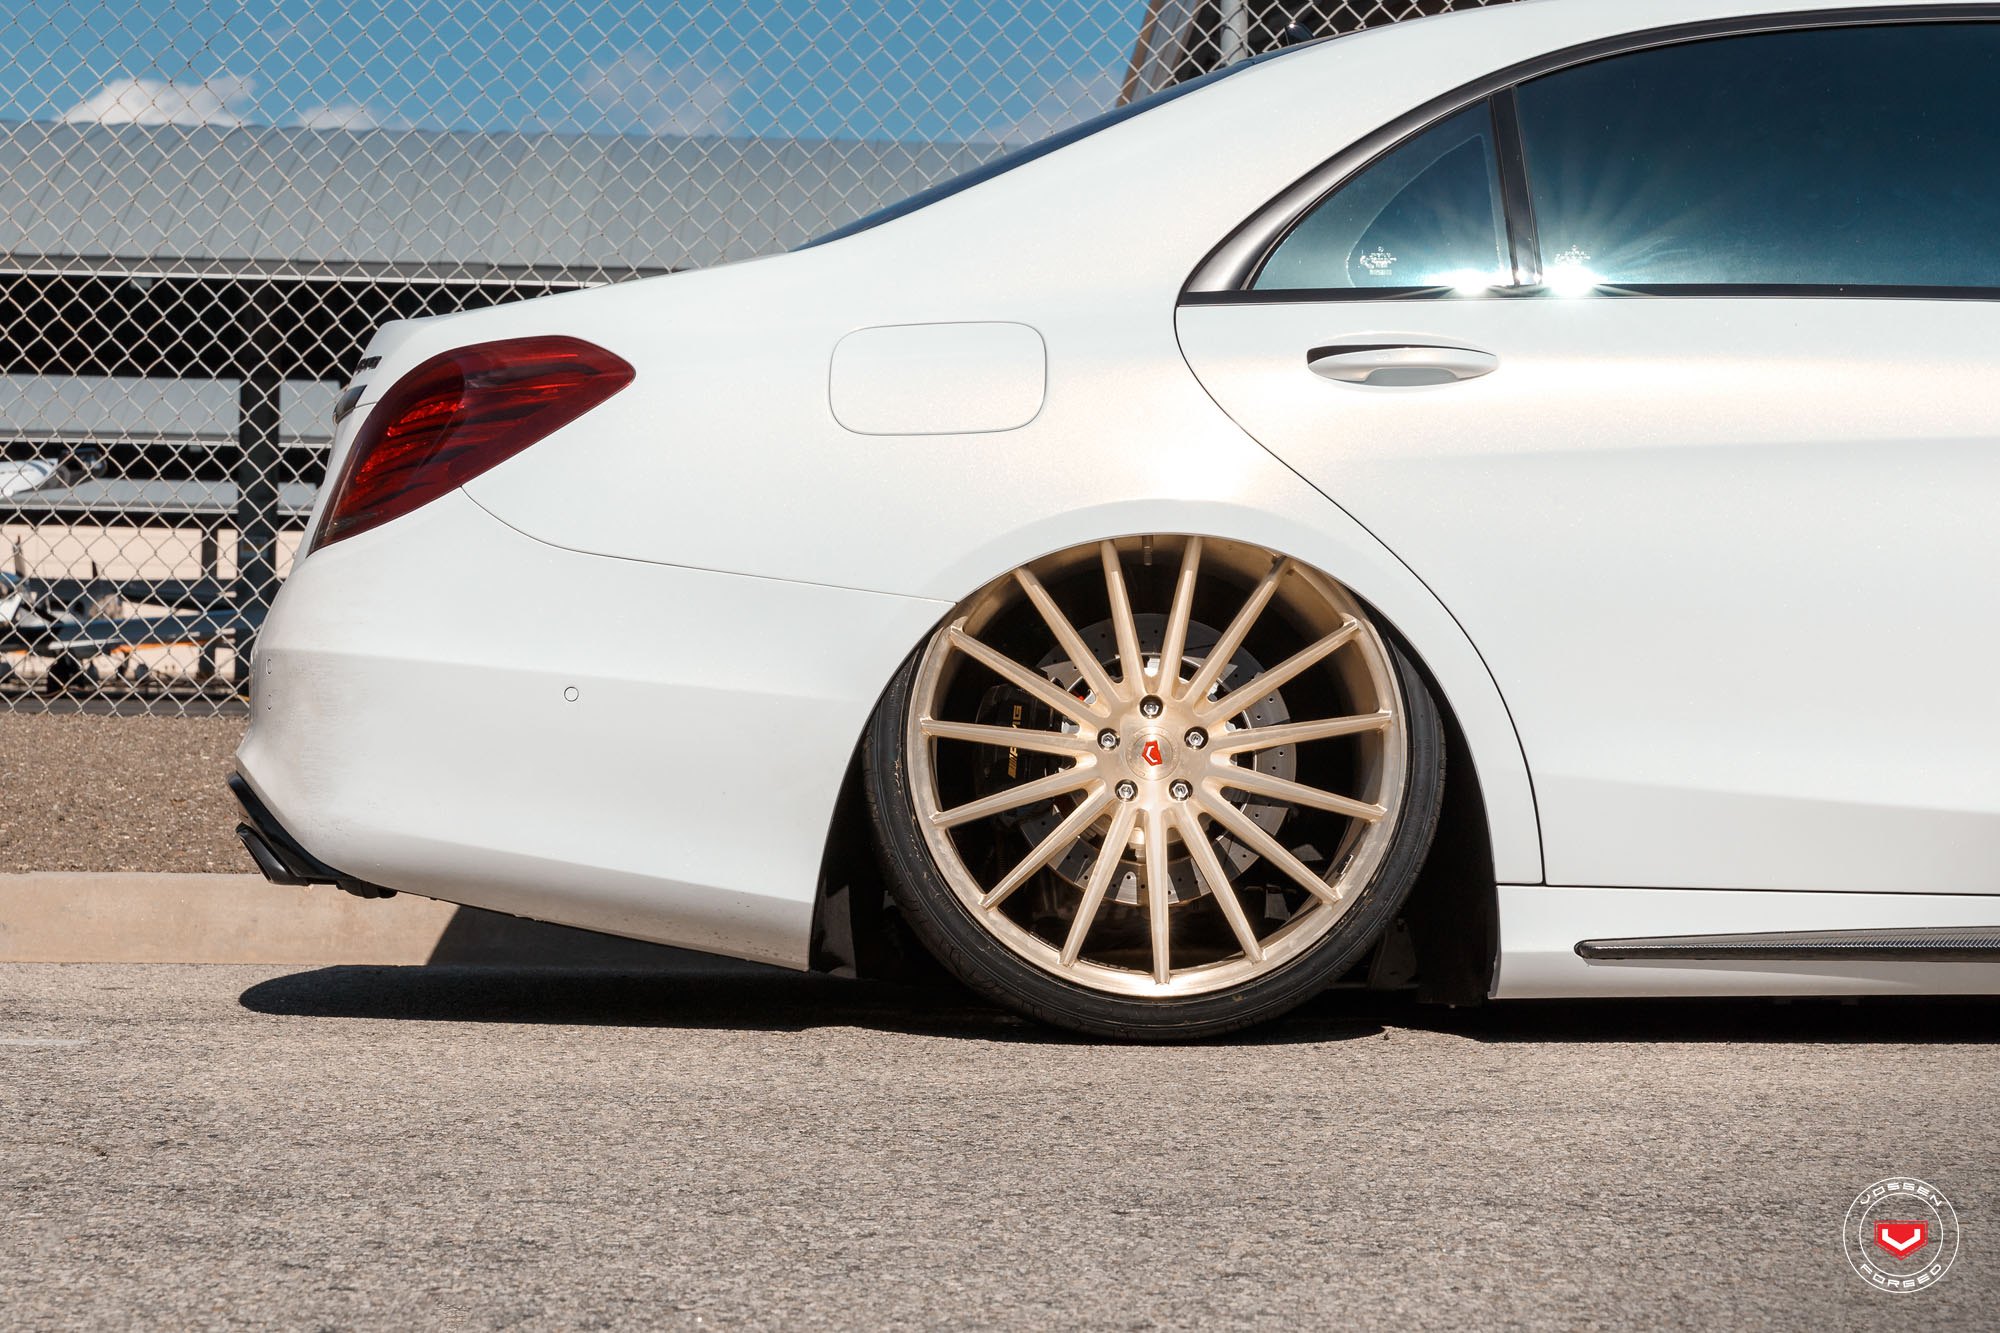 VPS Forged Vossen Wheels on White Mercedes S Class - Photo by Vossen